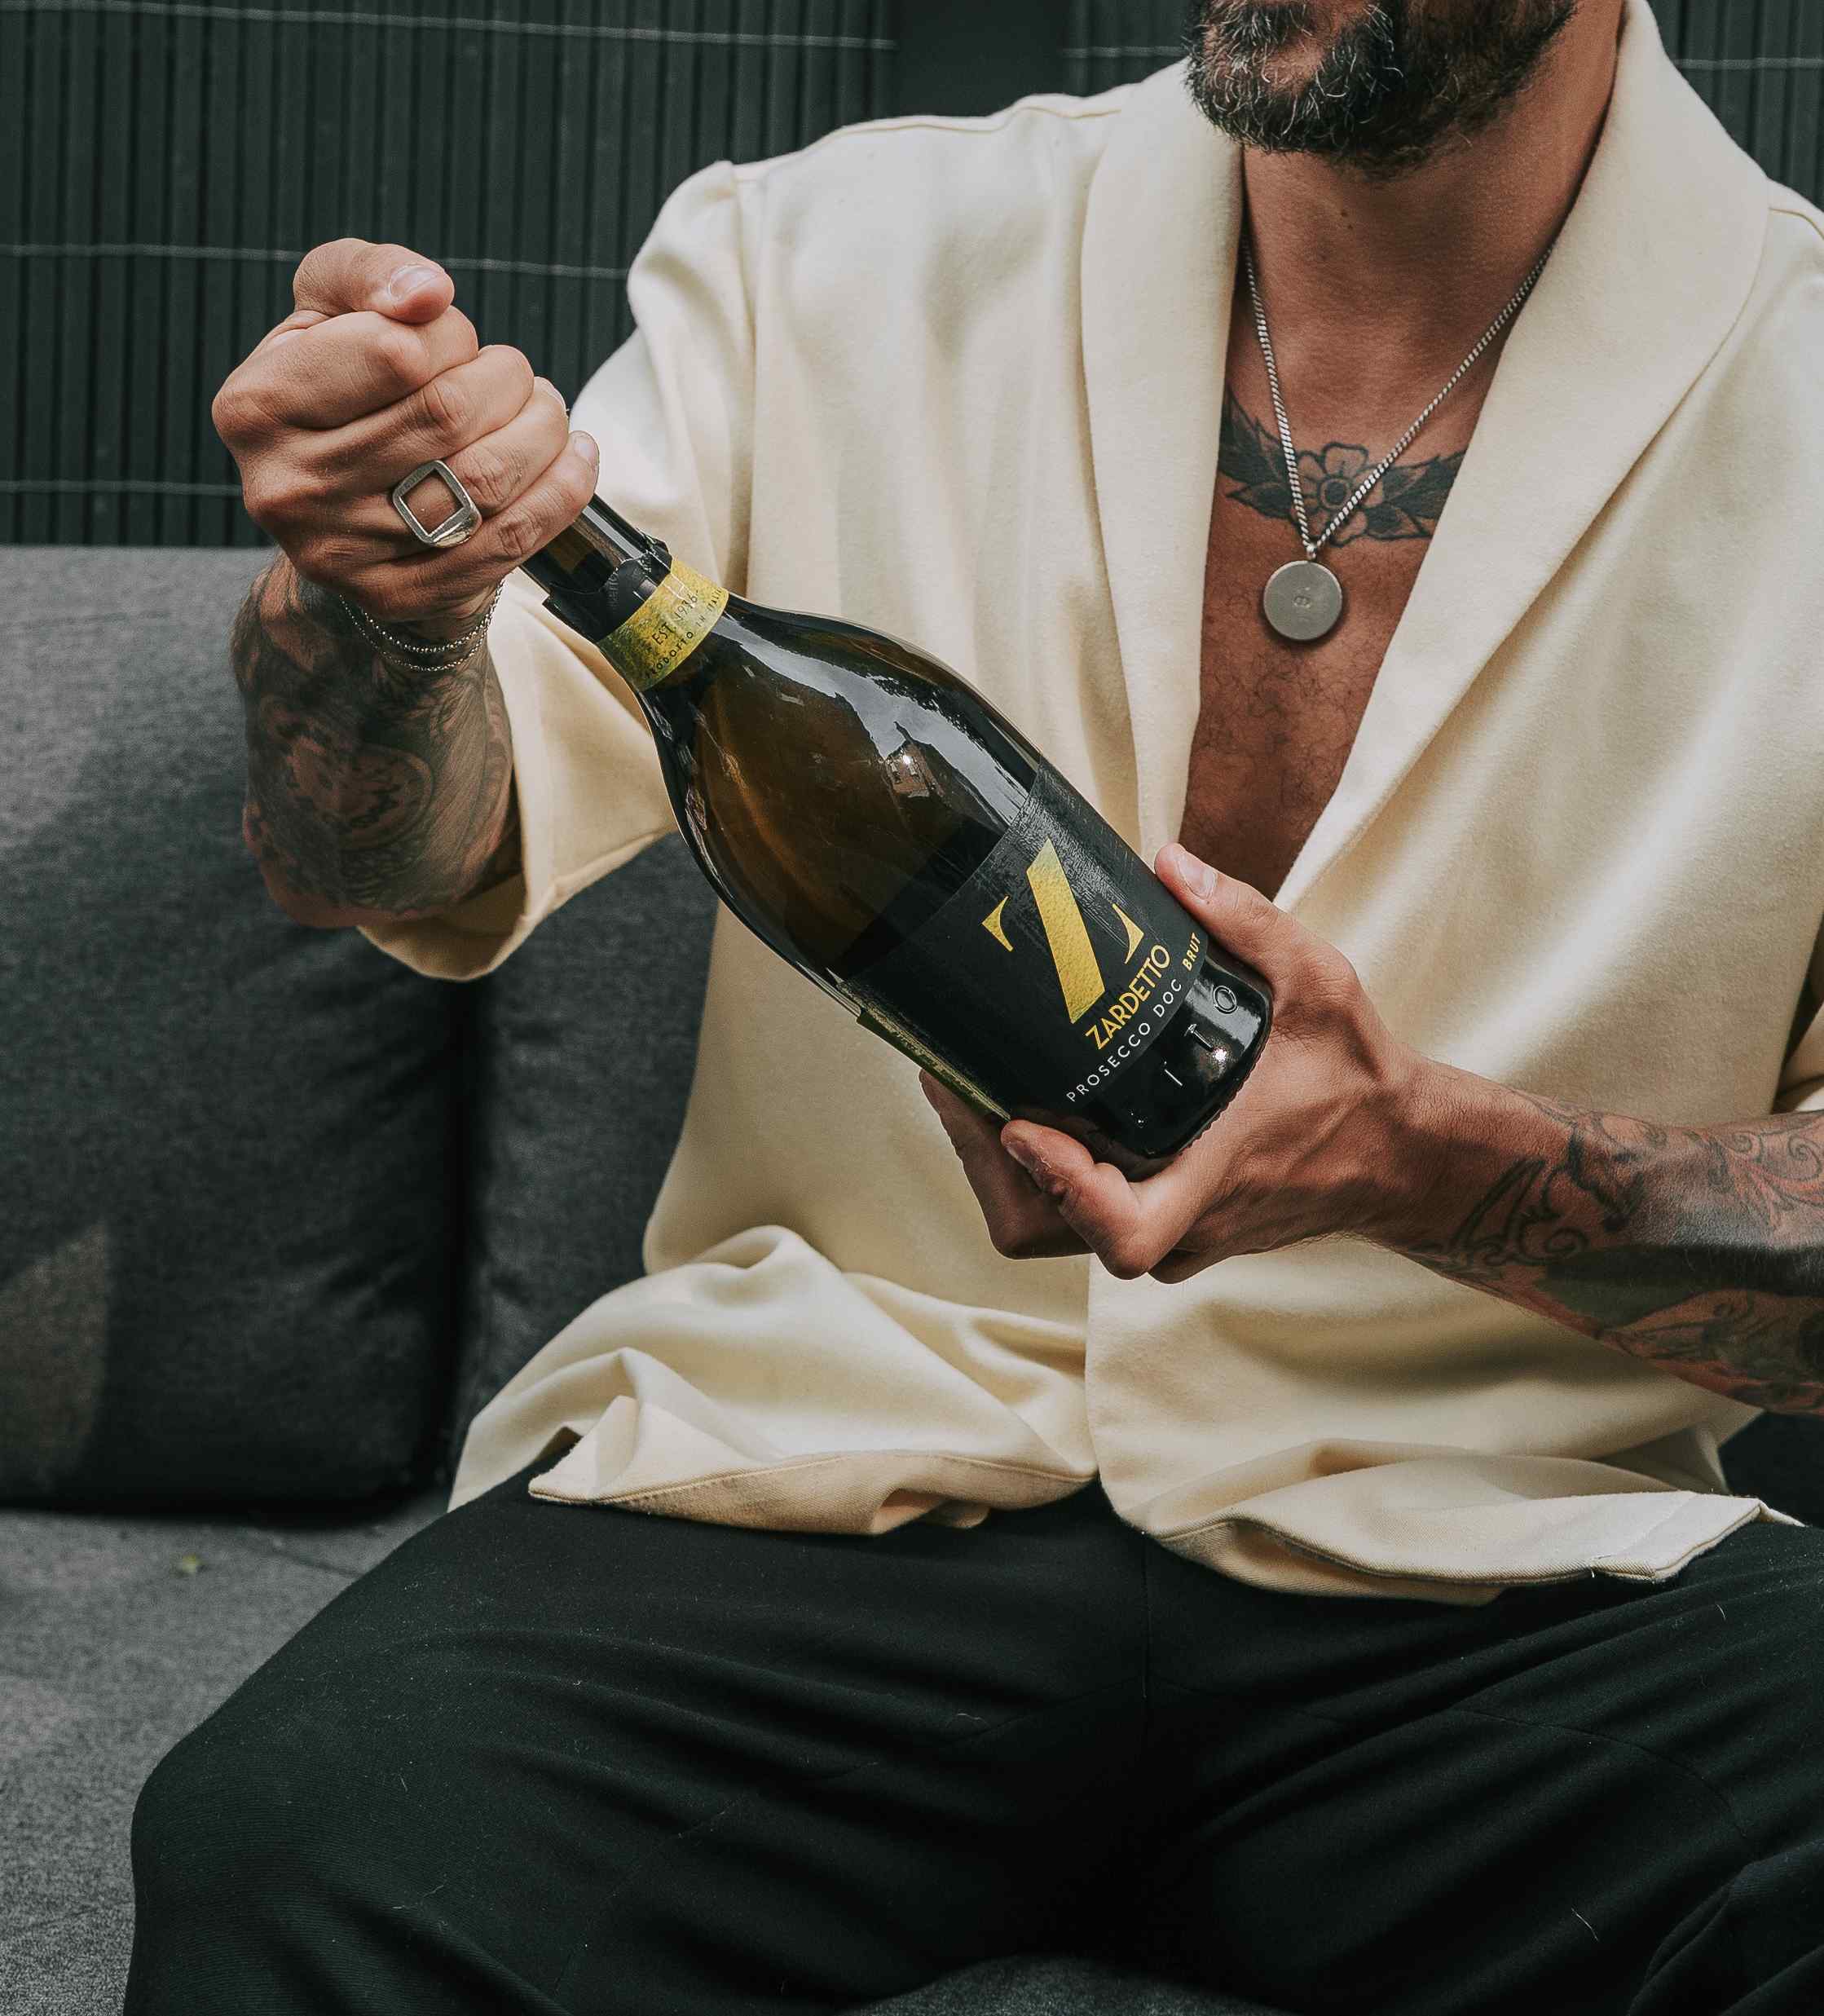 Man with tattooed arms opening a bottle of Zardetto prosecco, produced by Independent Non-Executive Directors at YesMore Drinks Marketing Consultancy